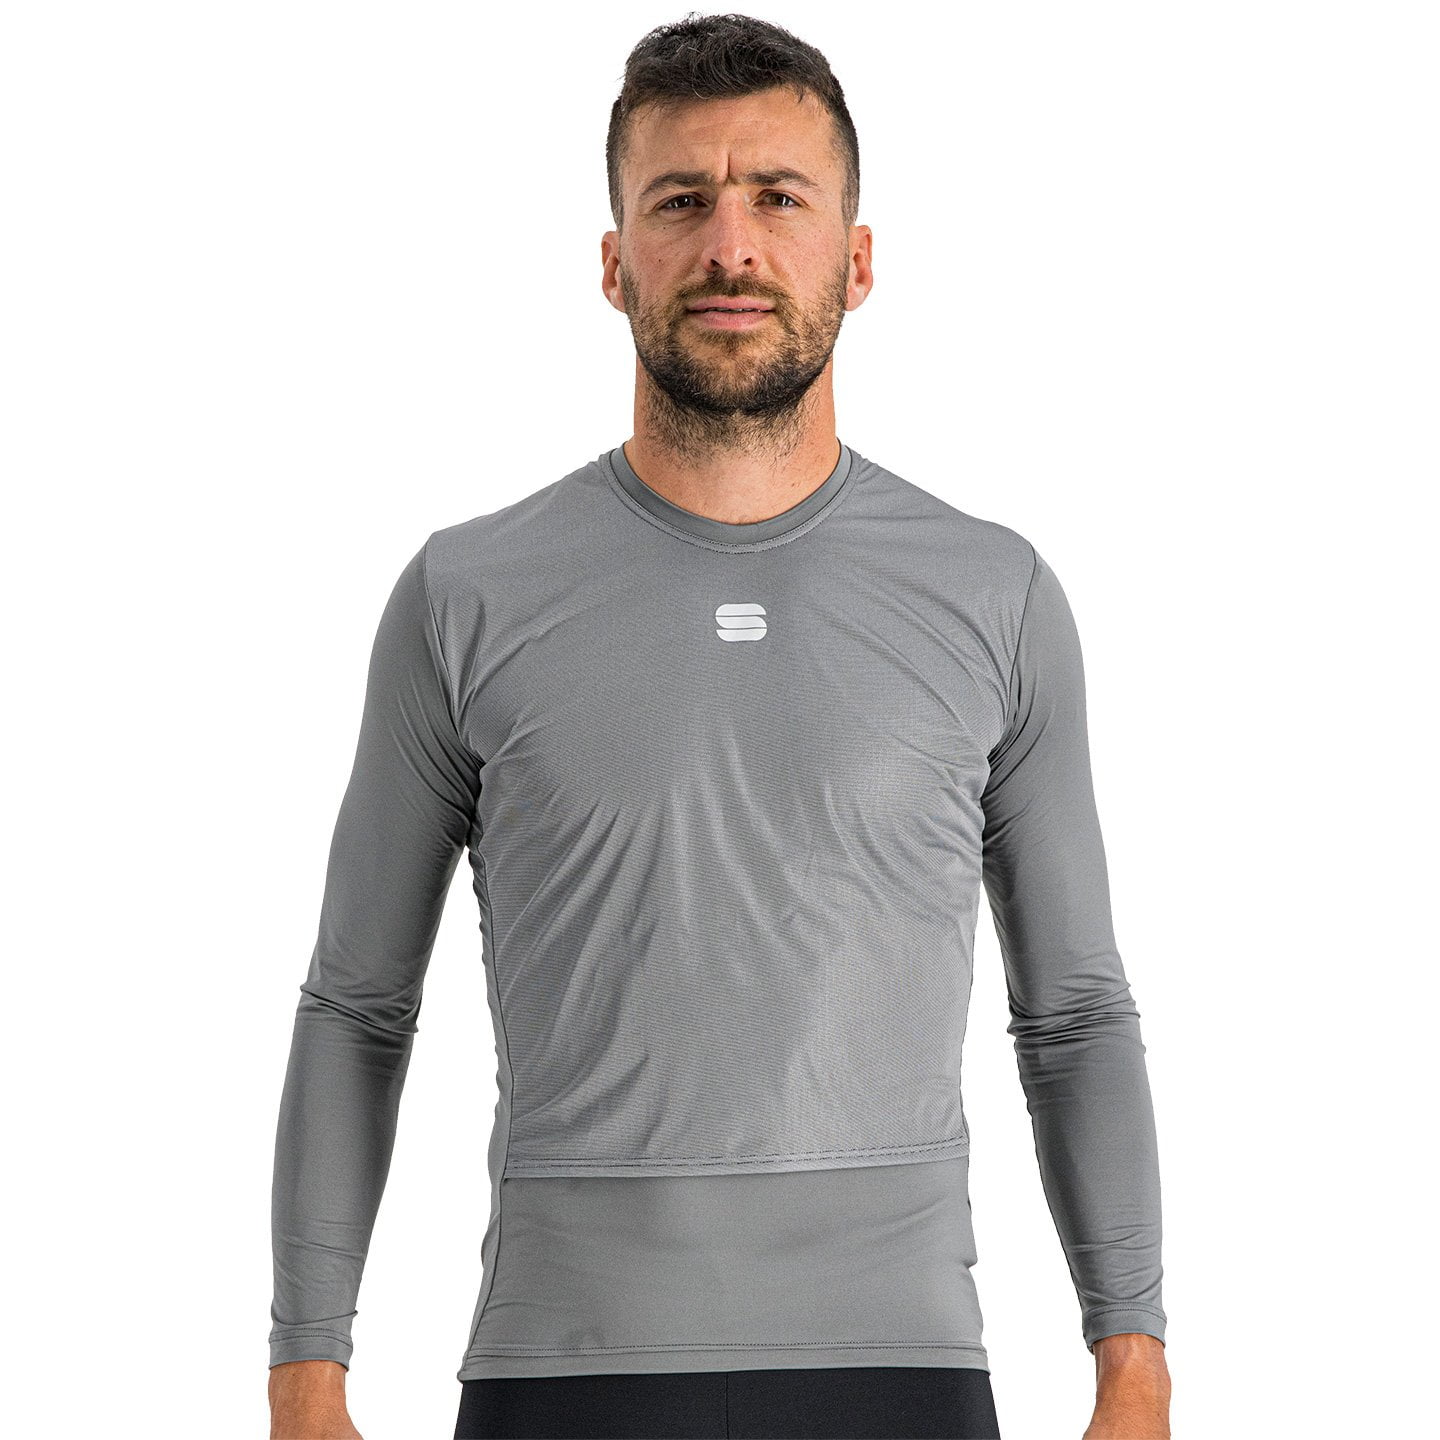 Sportful Fiandre Thermal Long Sleeve Cycling Base Layer Base Layer, for men, size XL, Singlet, Cycling clothing